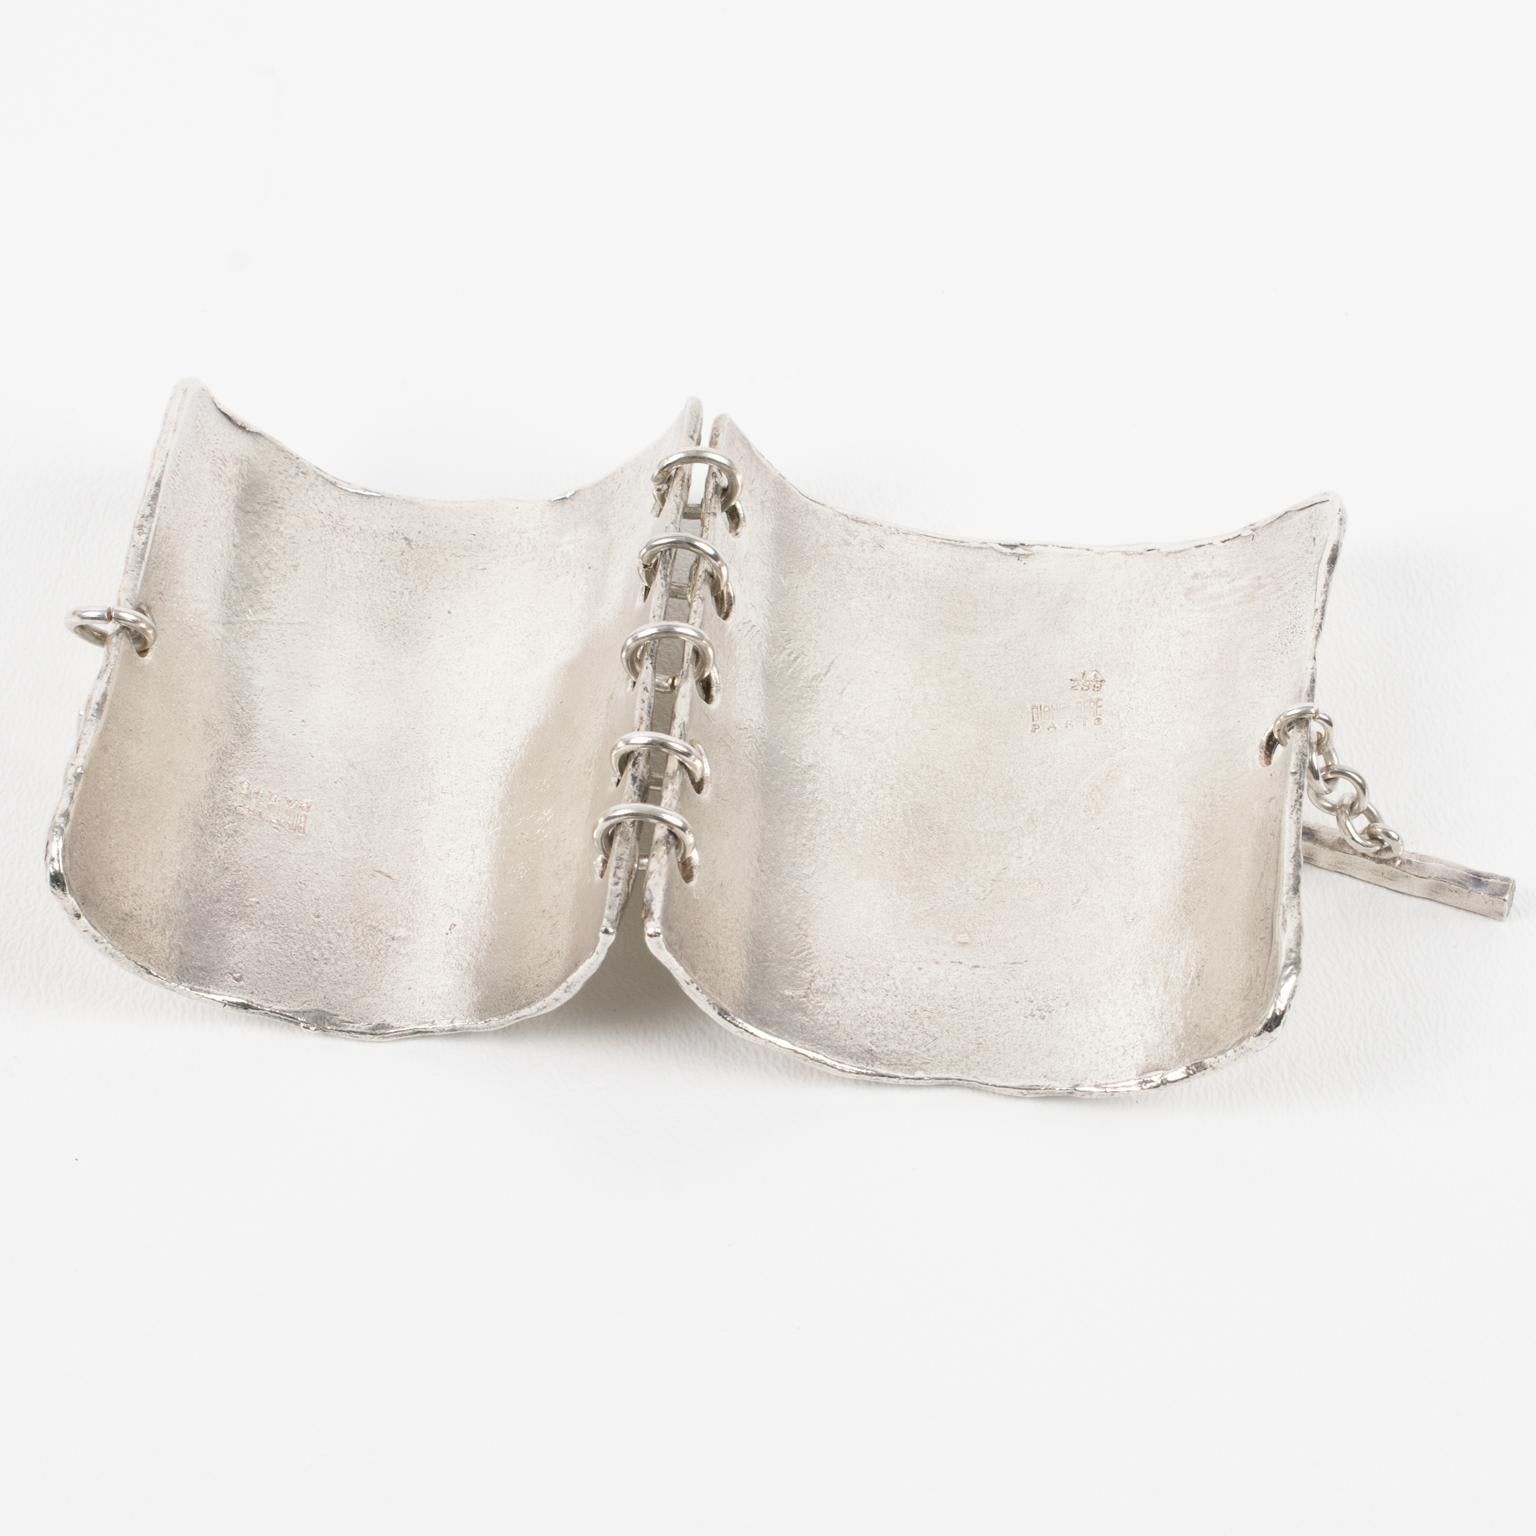 Nelly Biche de Bere, Paris, designed this massive modernist silver plate link bracelet. It features a chunky oversized bangle with a brutalist carved and hand-made feel design ornate with a textured pattern. The two elements are slightly curved to